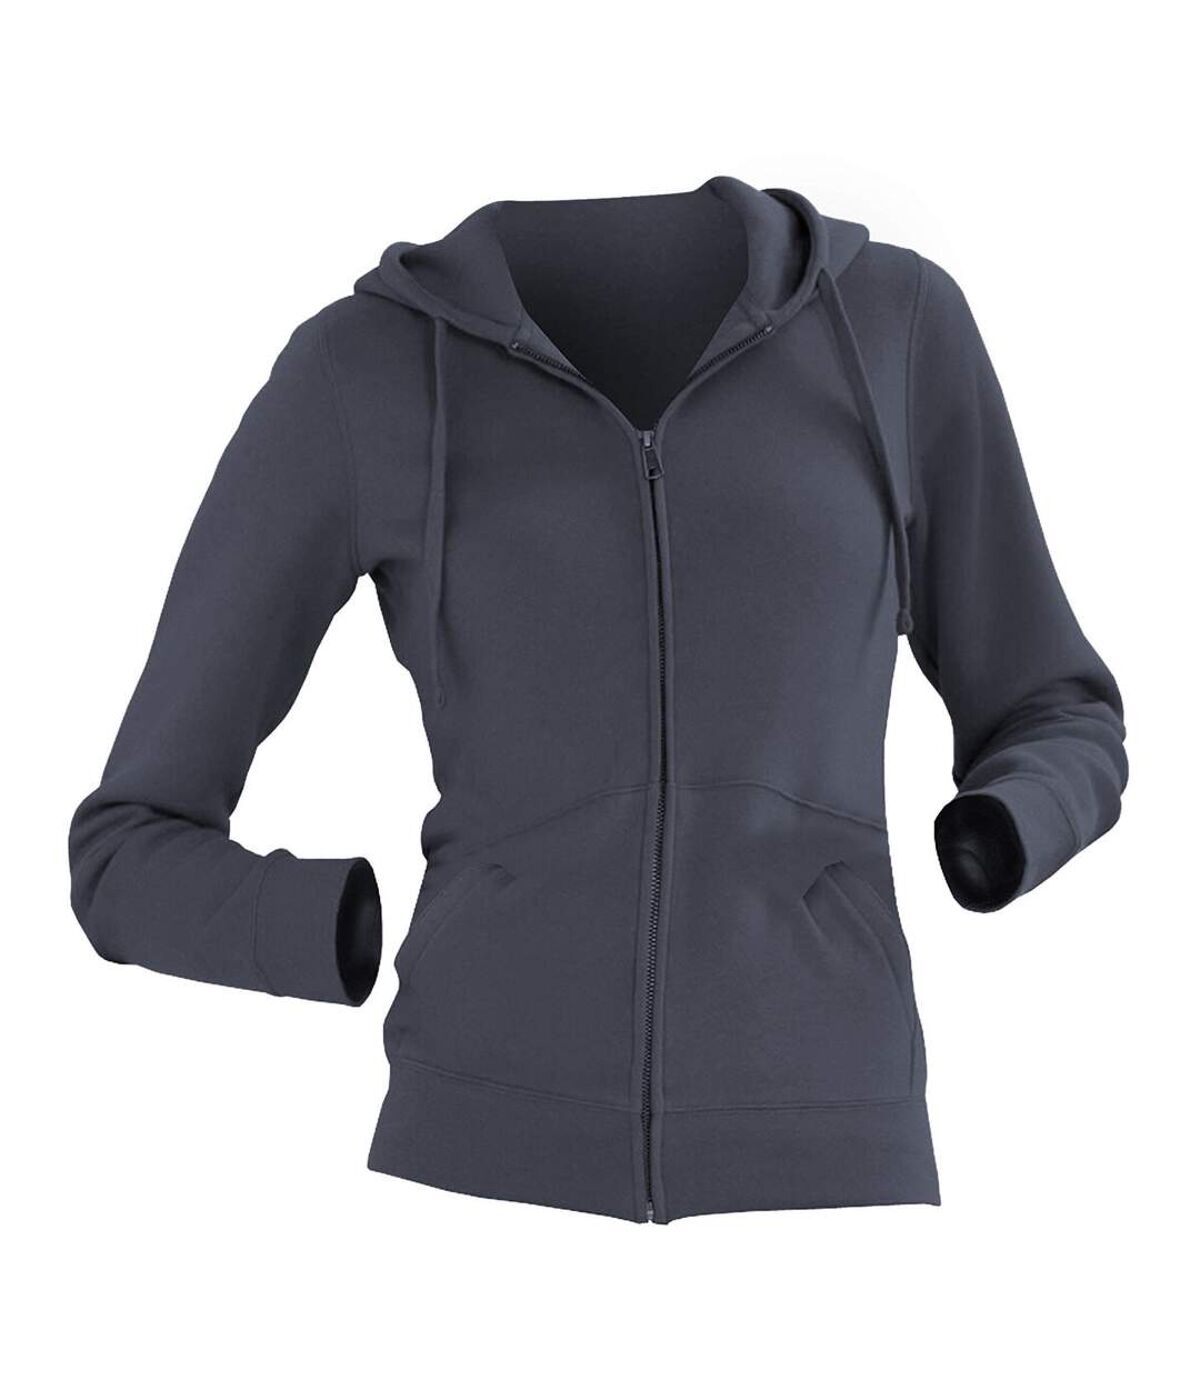 Russell Ladies Premium Authentic Zipped Hoodie (3-Layer Fabric) (Convoy Grey)